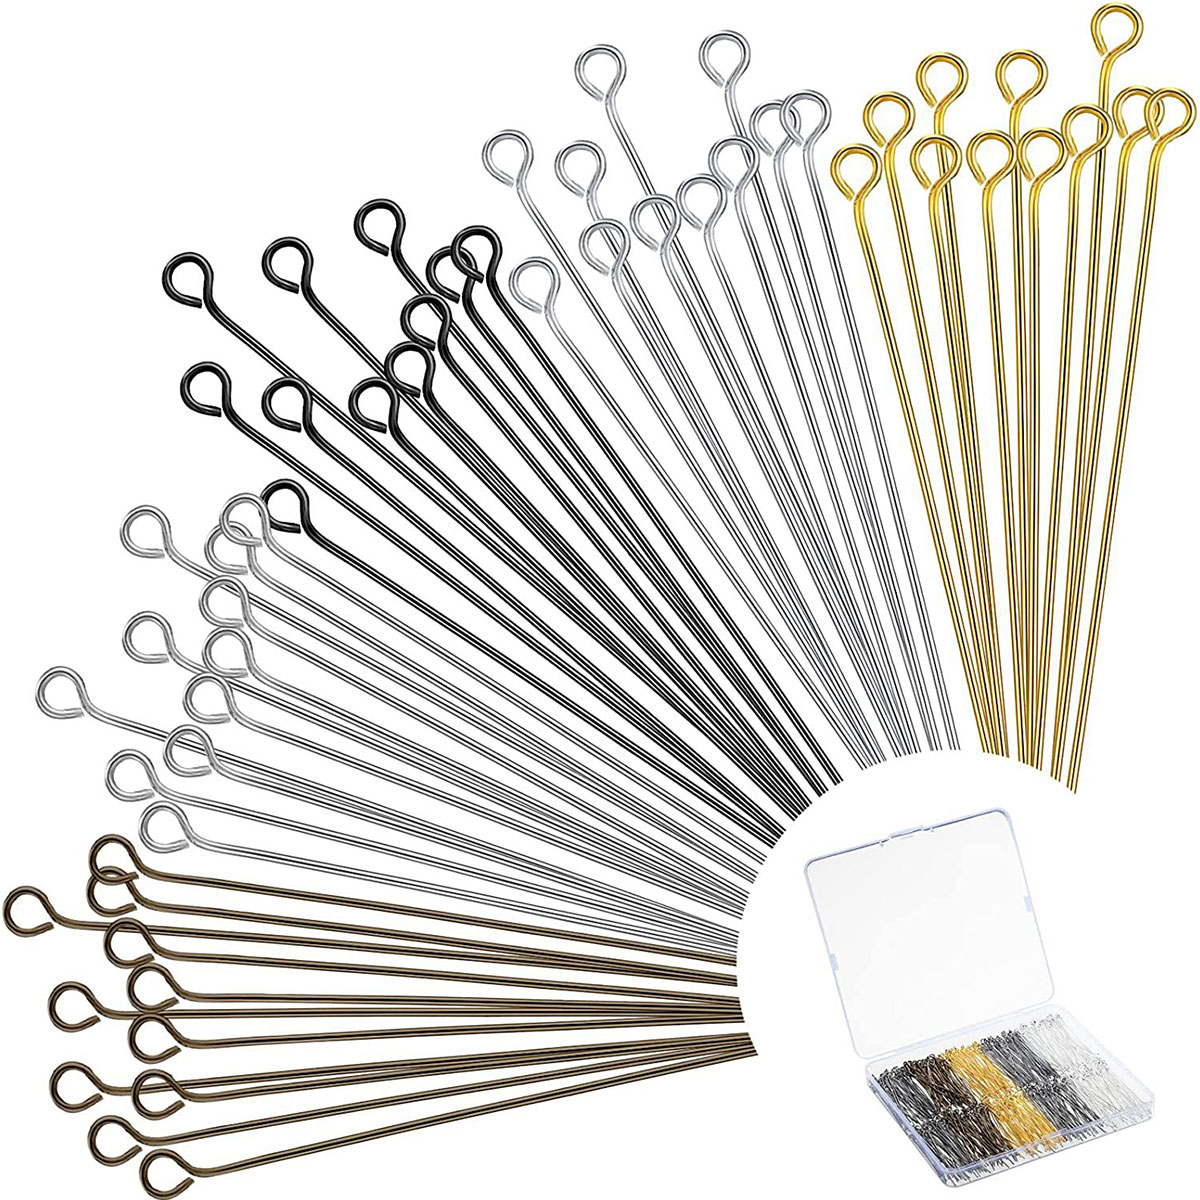 500pcs Iron Open Eye Pins 2.0 Inch DIY Craft Making Eye Pins with Storage  Box Not Easy To Deform or Fracture Head Pins Findings for Earring Pendant Bracelet  Jewelry Necklace Making 